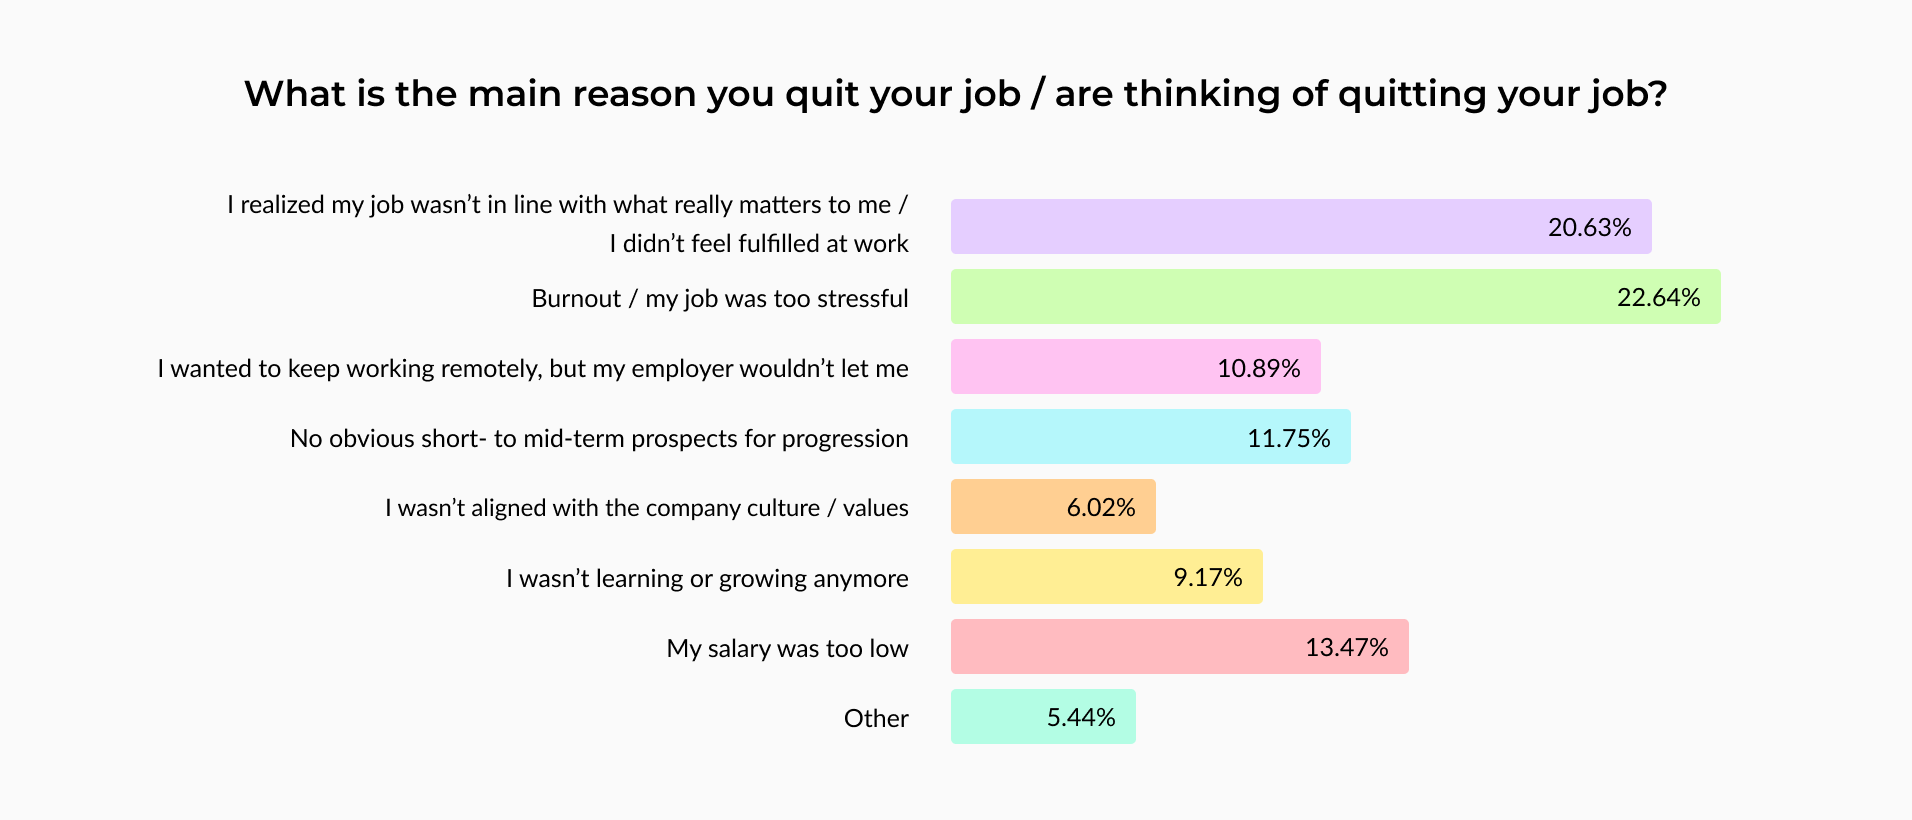 reasons for quitting job